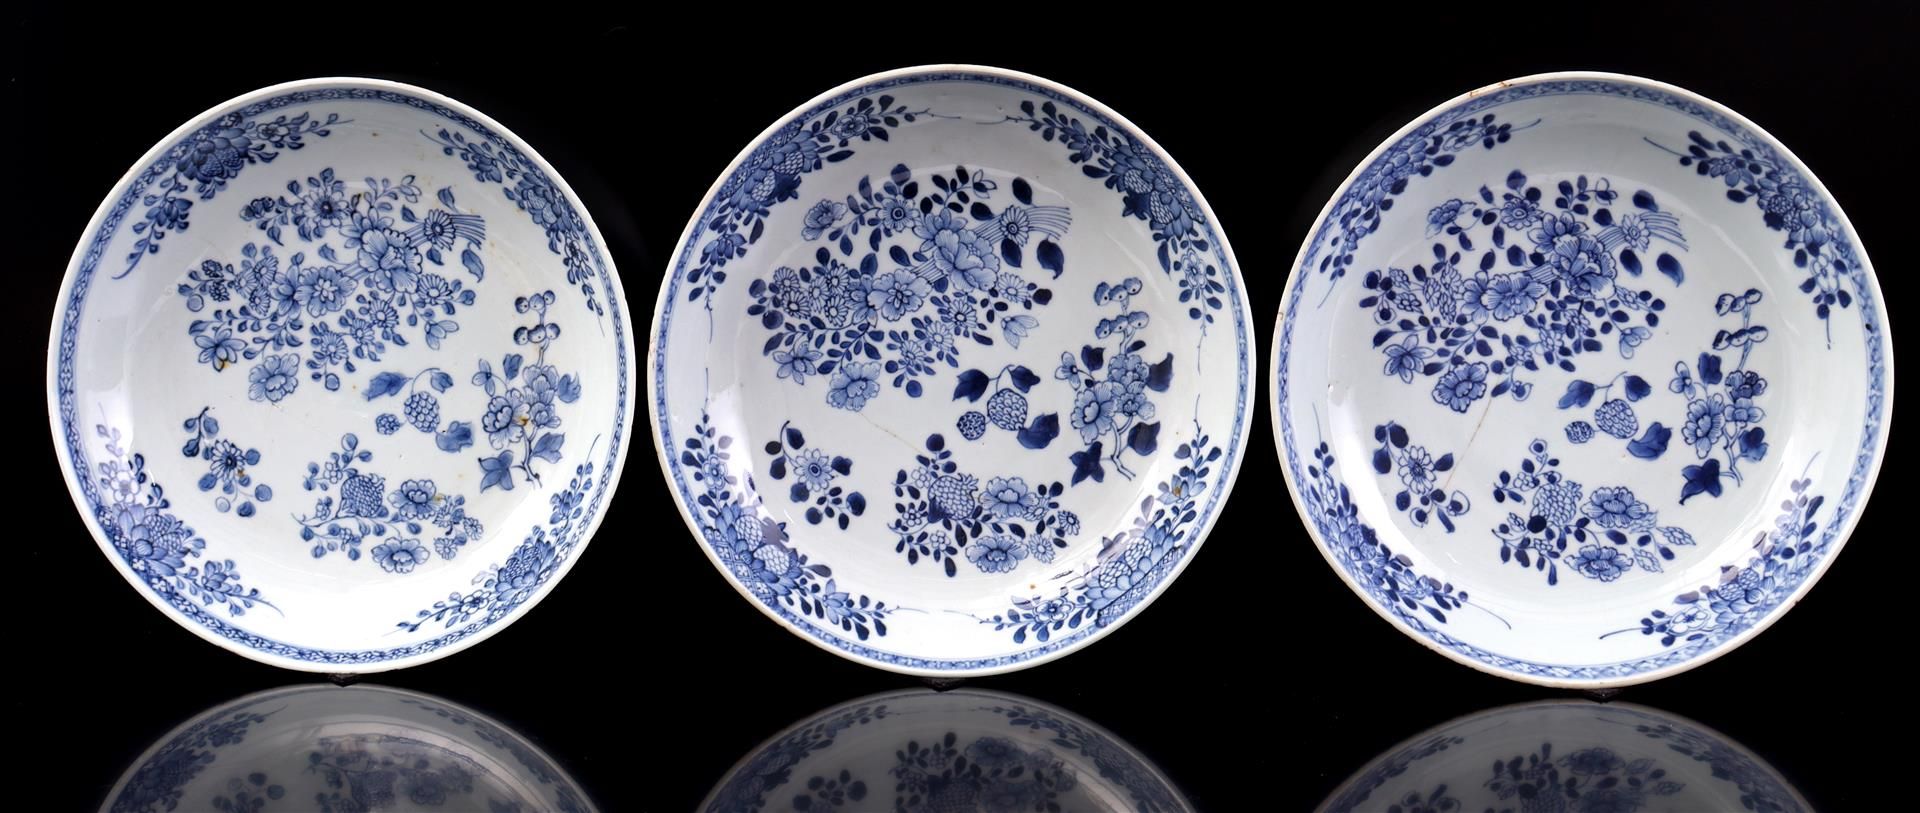 3 porcelain dishes with blue and white floral decor of peonies